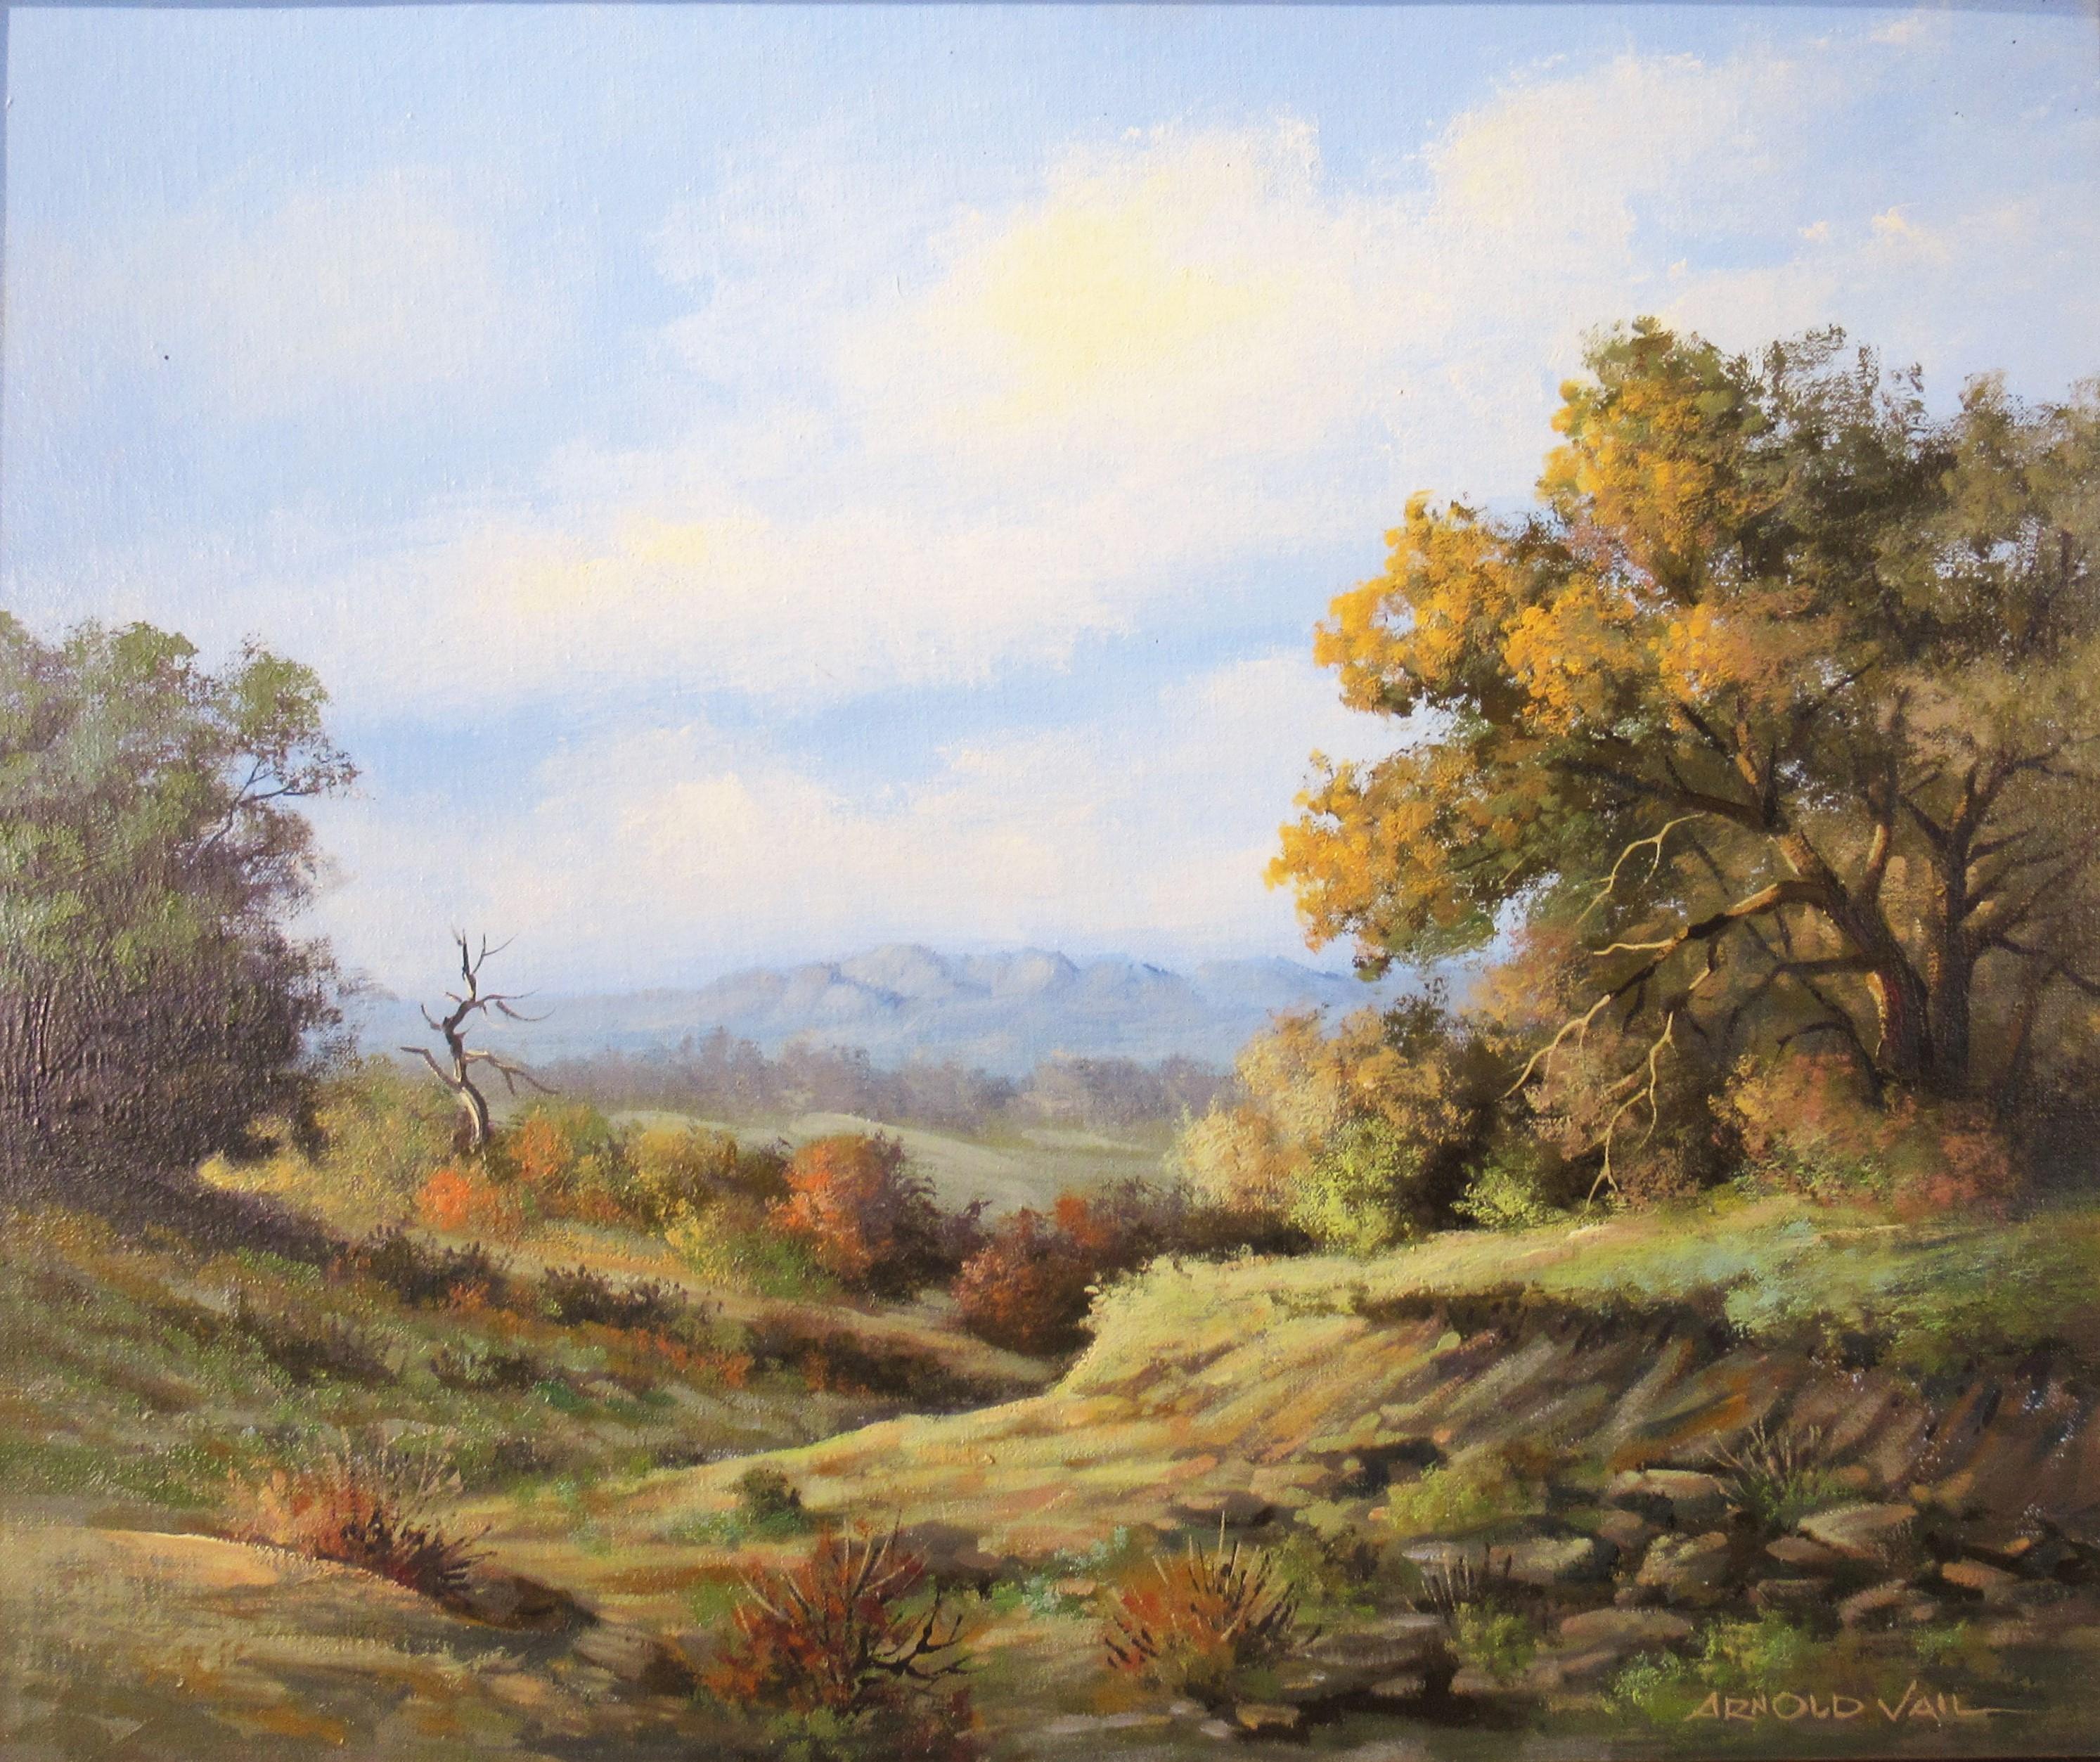 Texas Hill Country - Painting by Arnold Vail